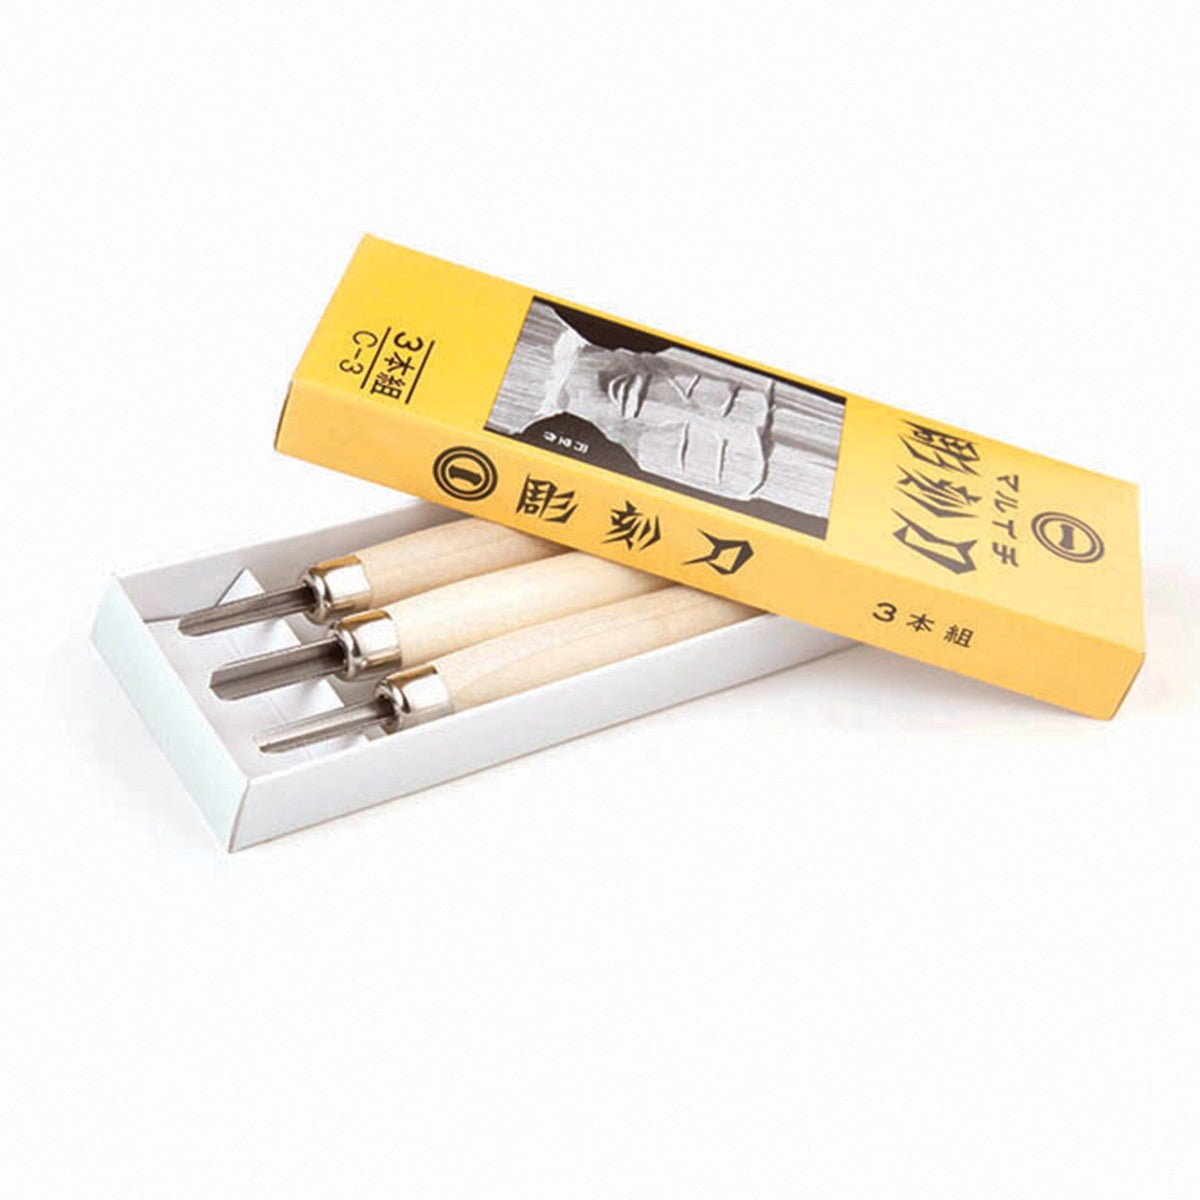 3 Piece Lino Cutting Set (Honed) - Melbourne Etching Supplies